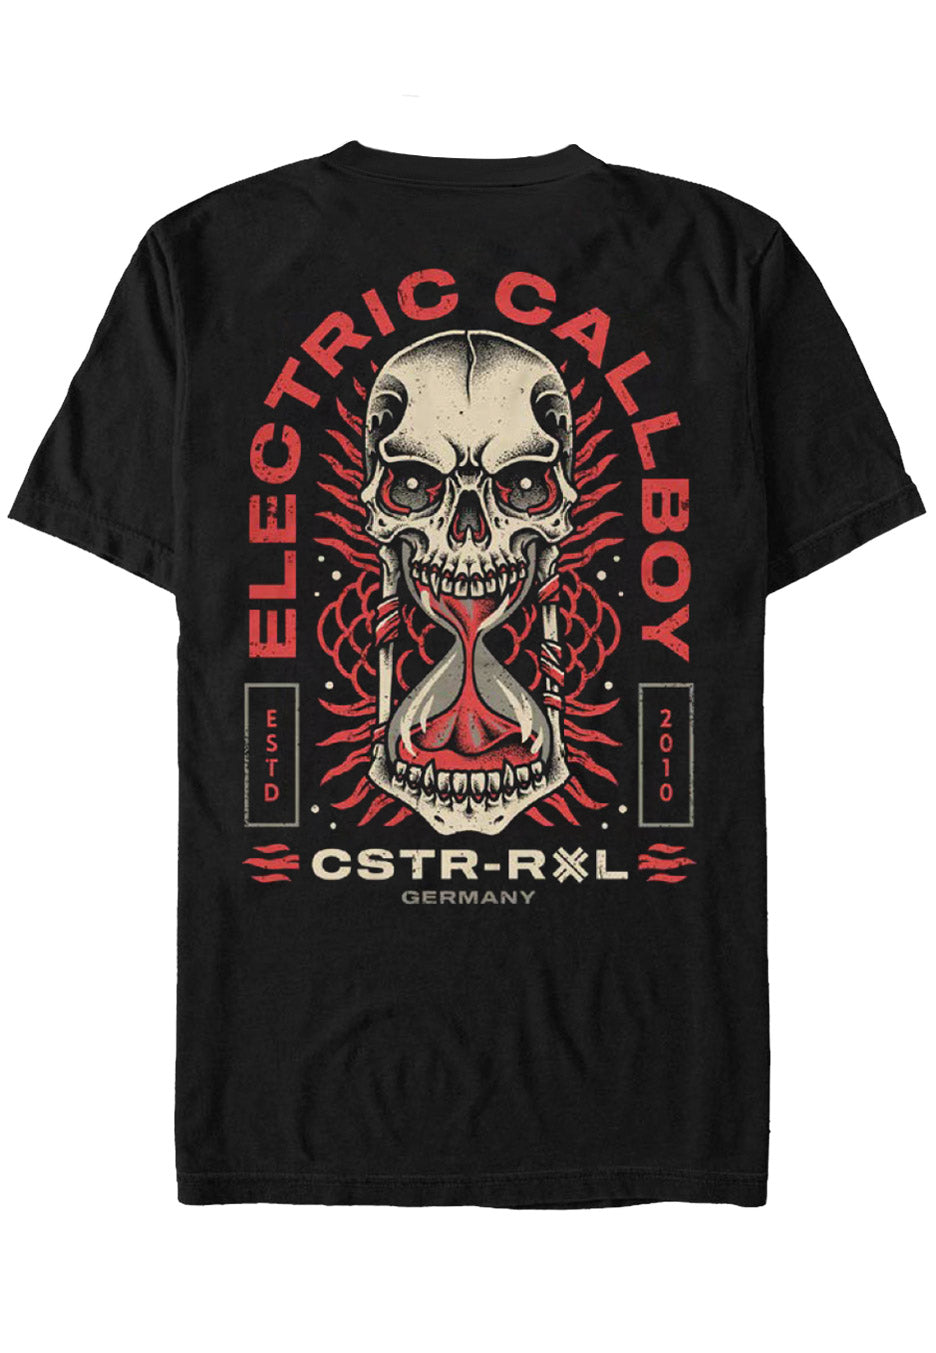 Electric Callboy - Hourglass - T-Shirt